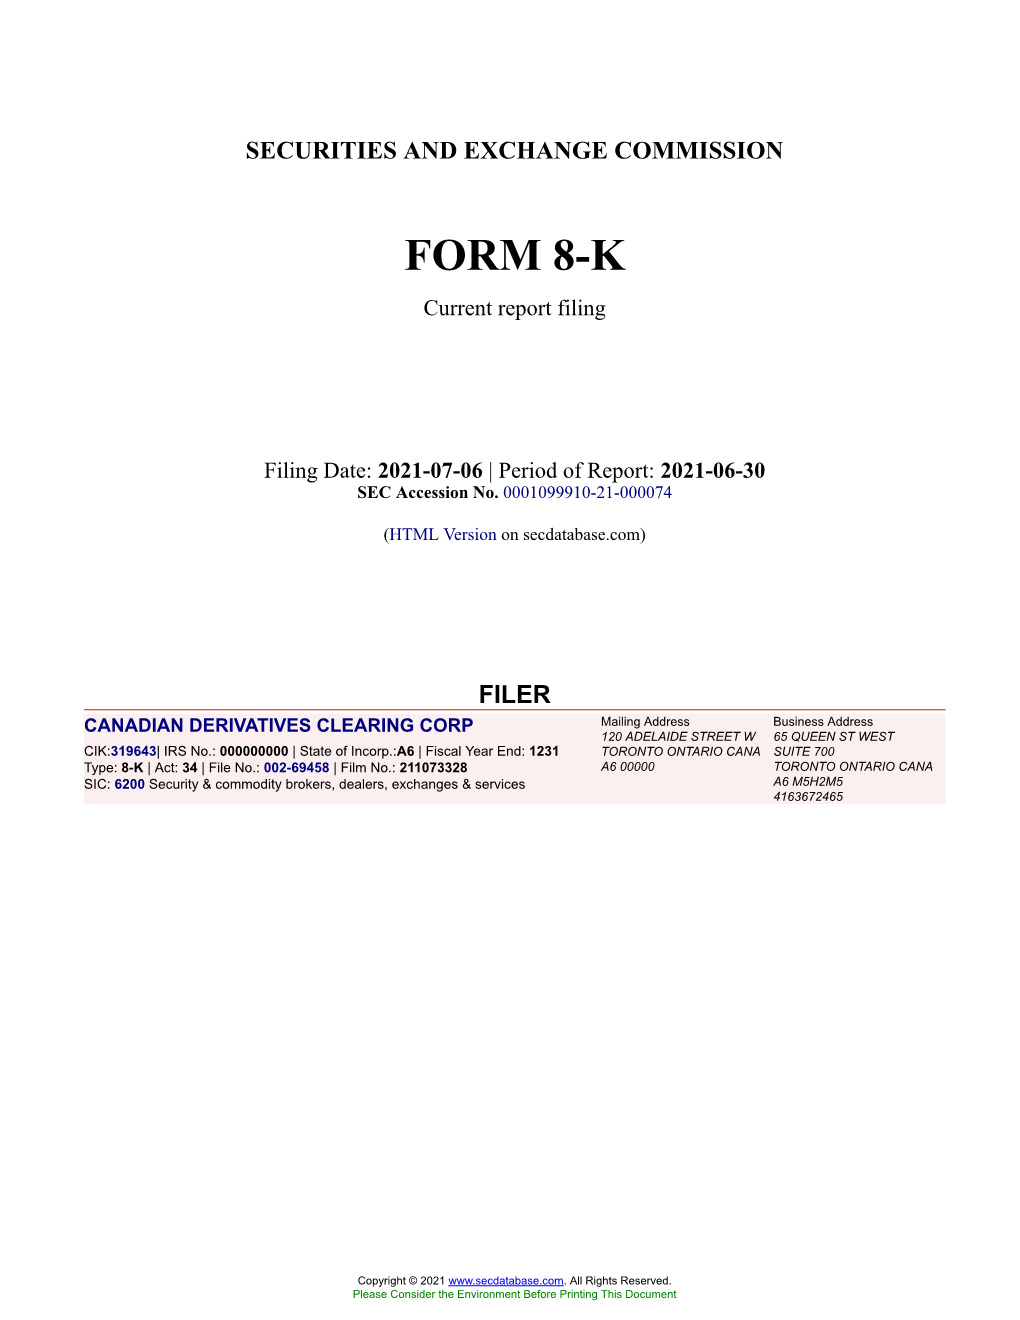 CANADIAN DERIVATIVES CLEARING CORP Form 8-K